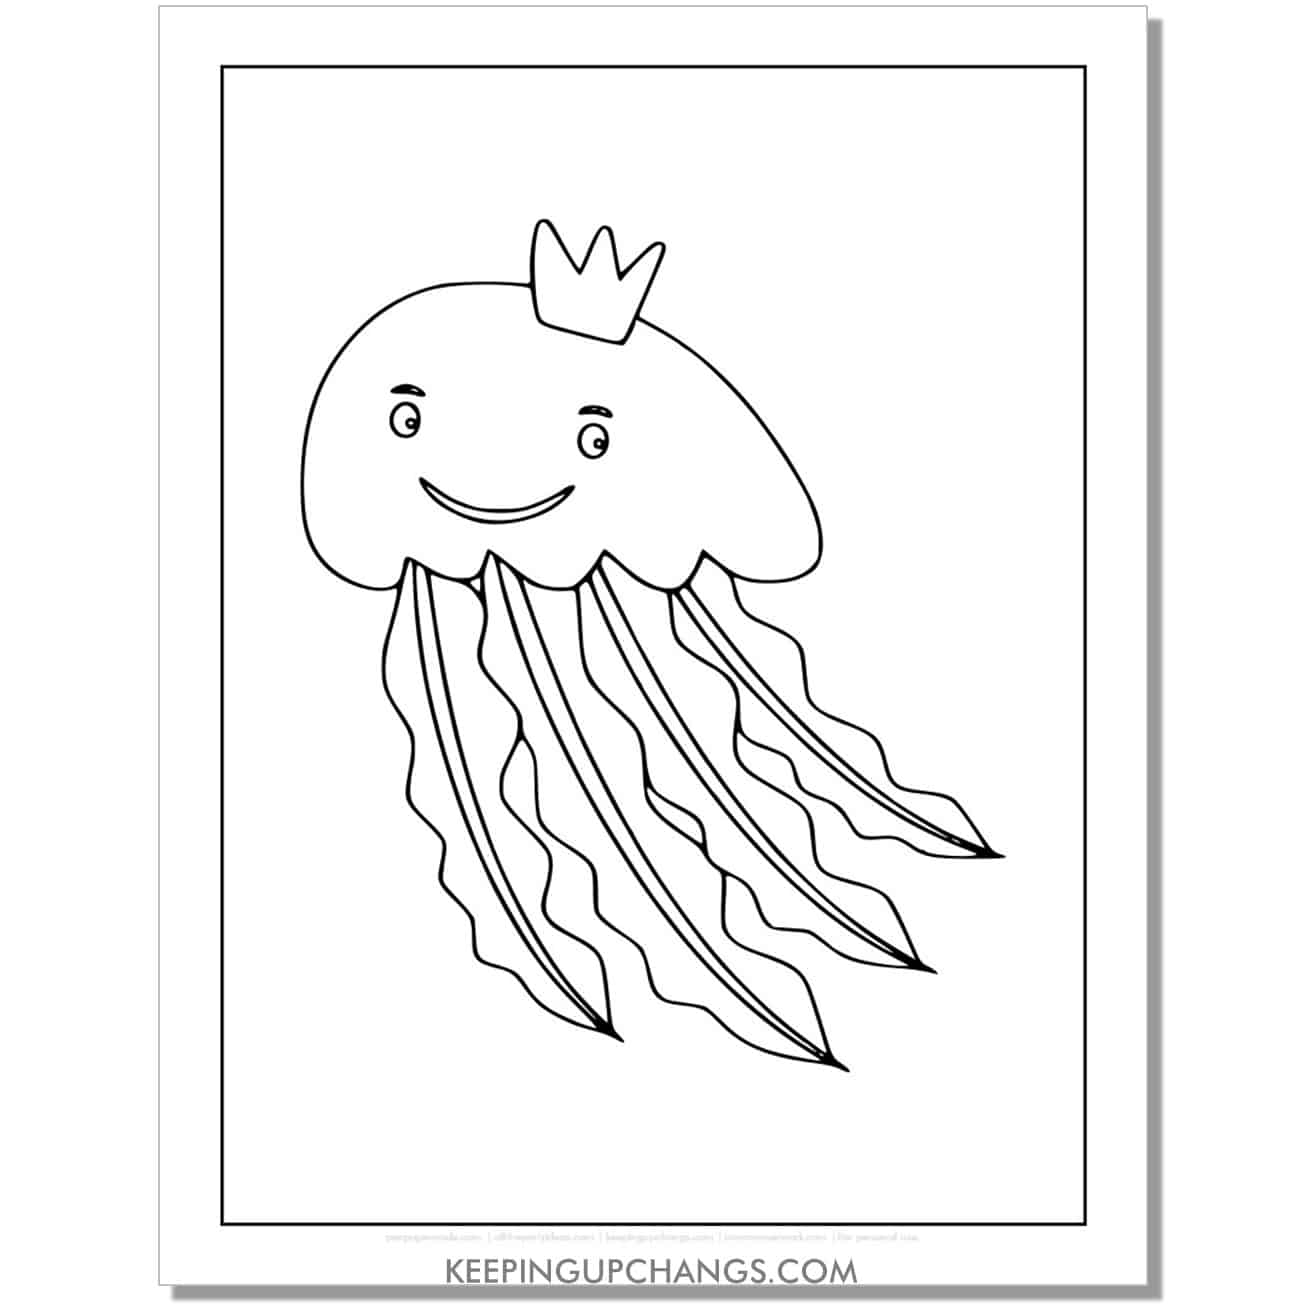 free cartoon ilustrated jellyfish coloring page, sheet with crown.